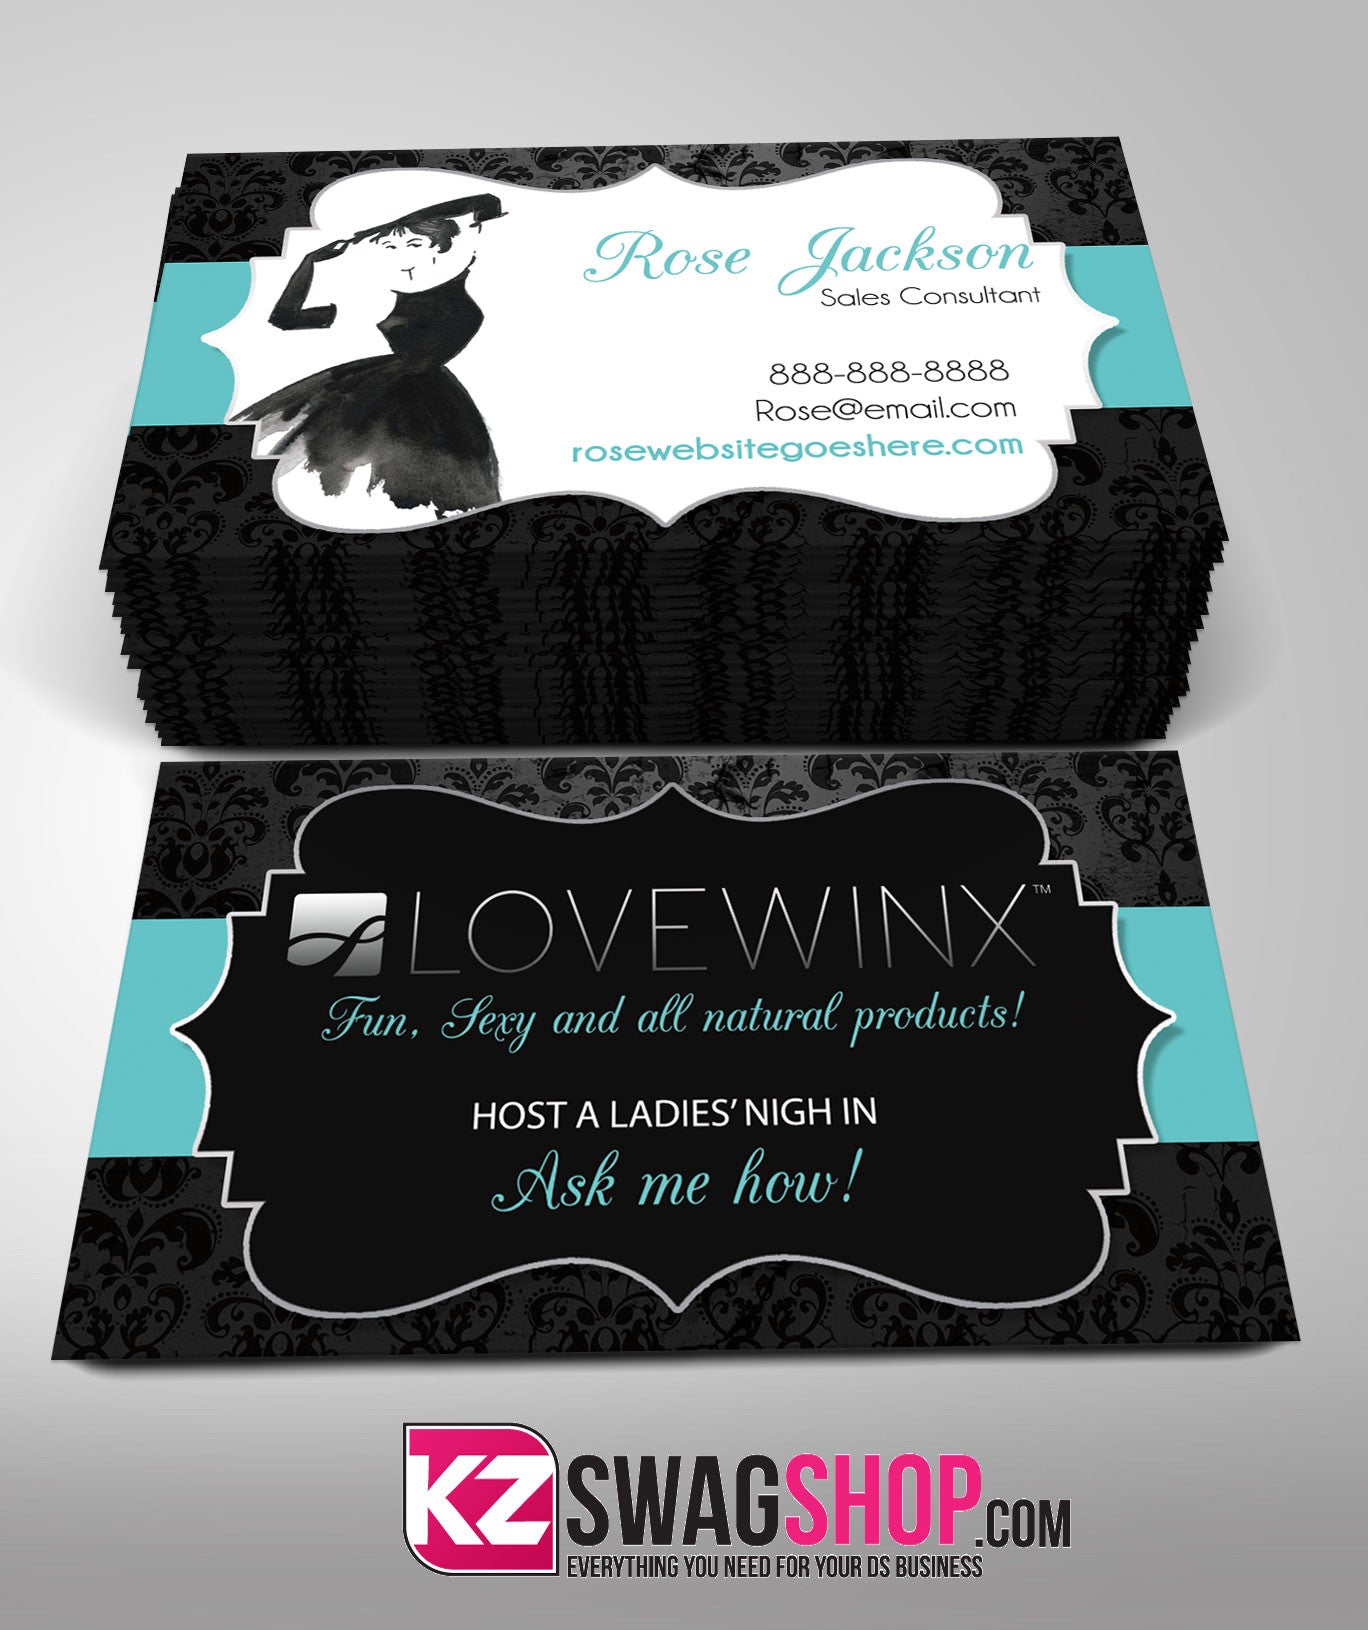 LOVEWINX Business Cards Style 3